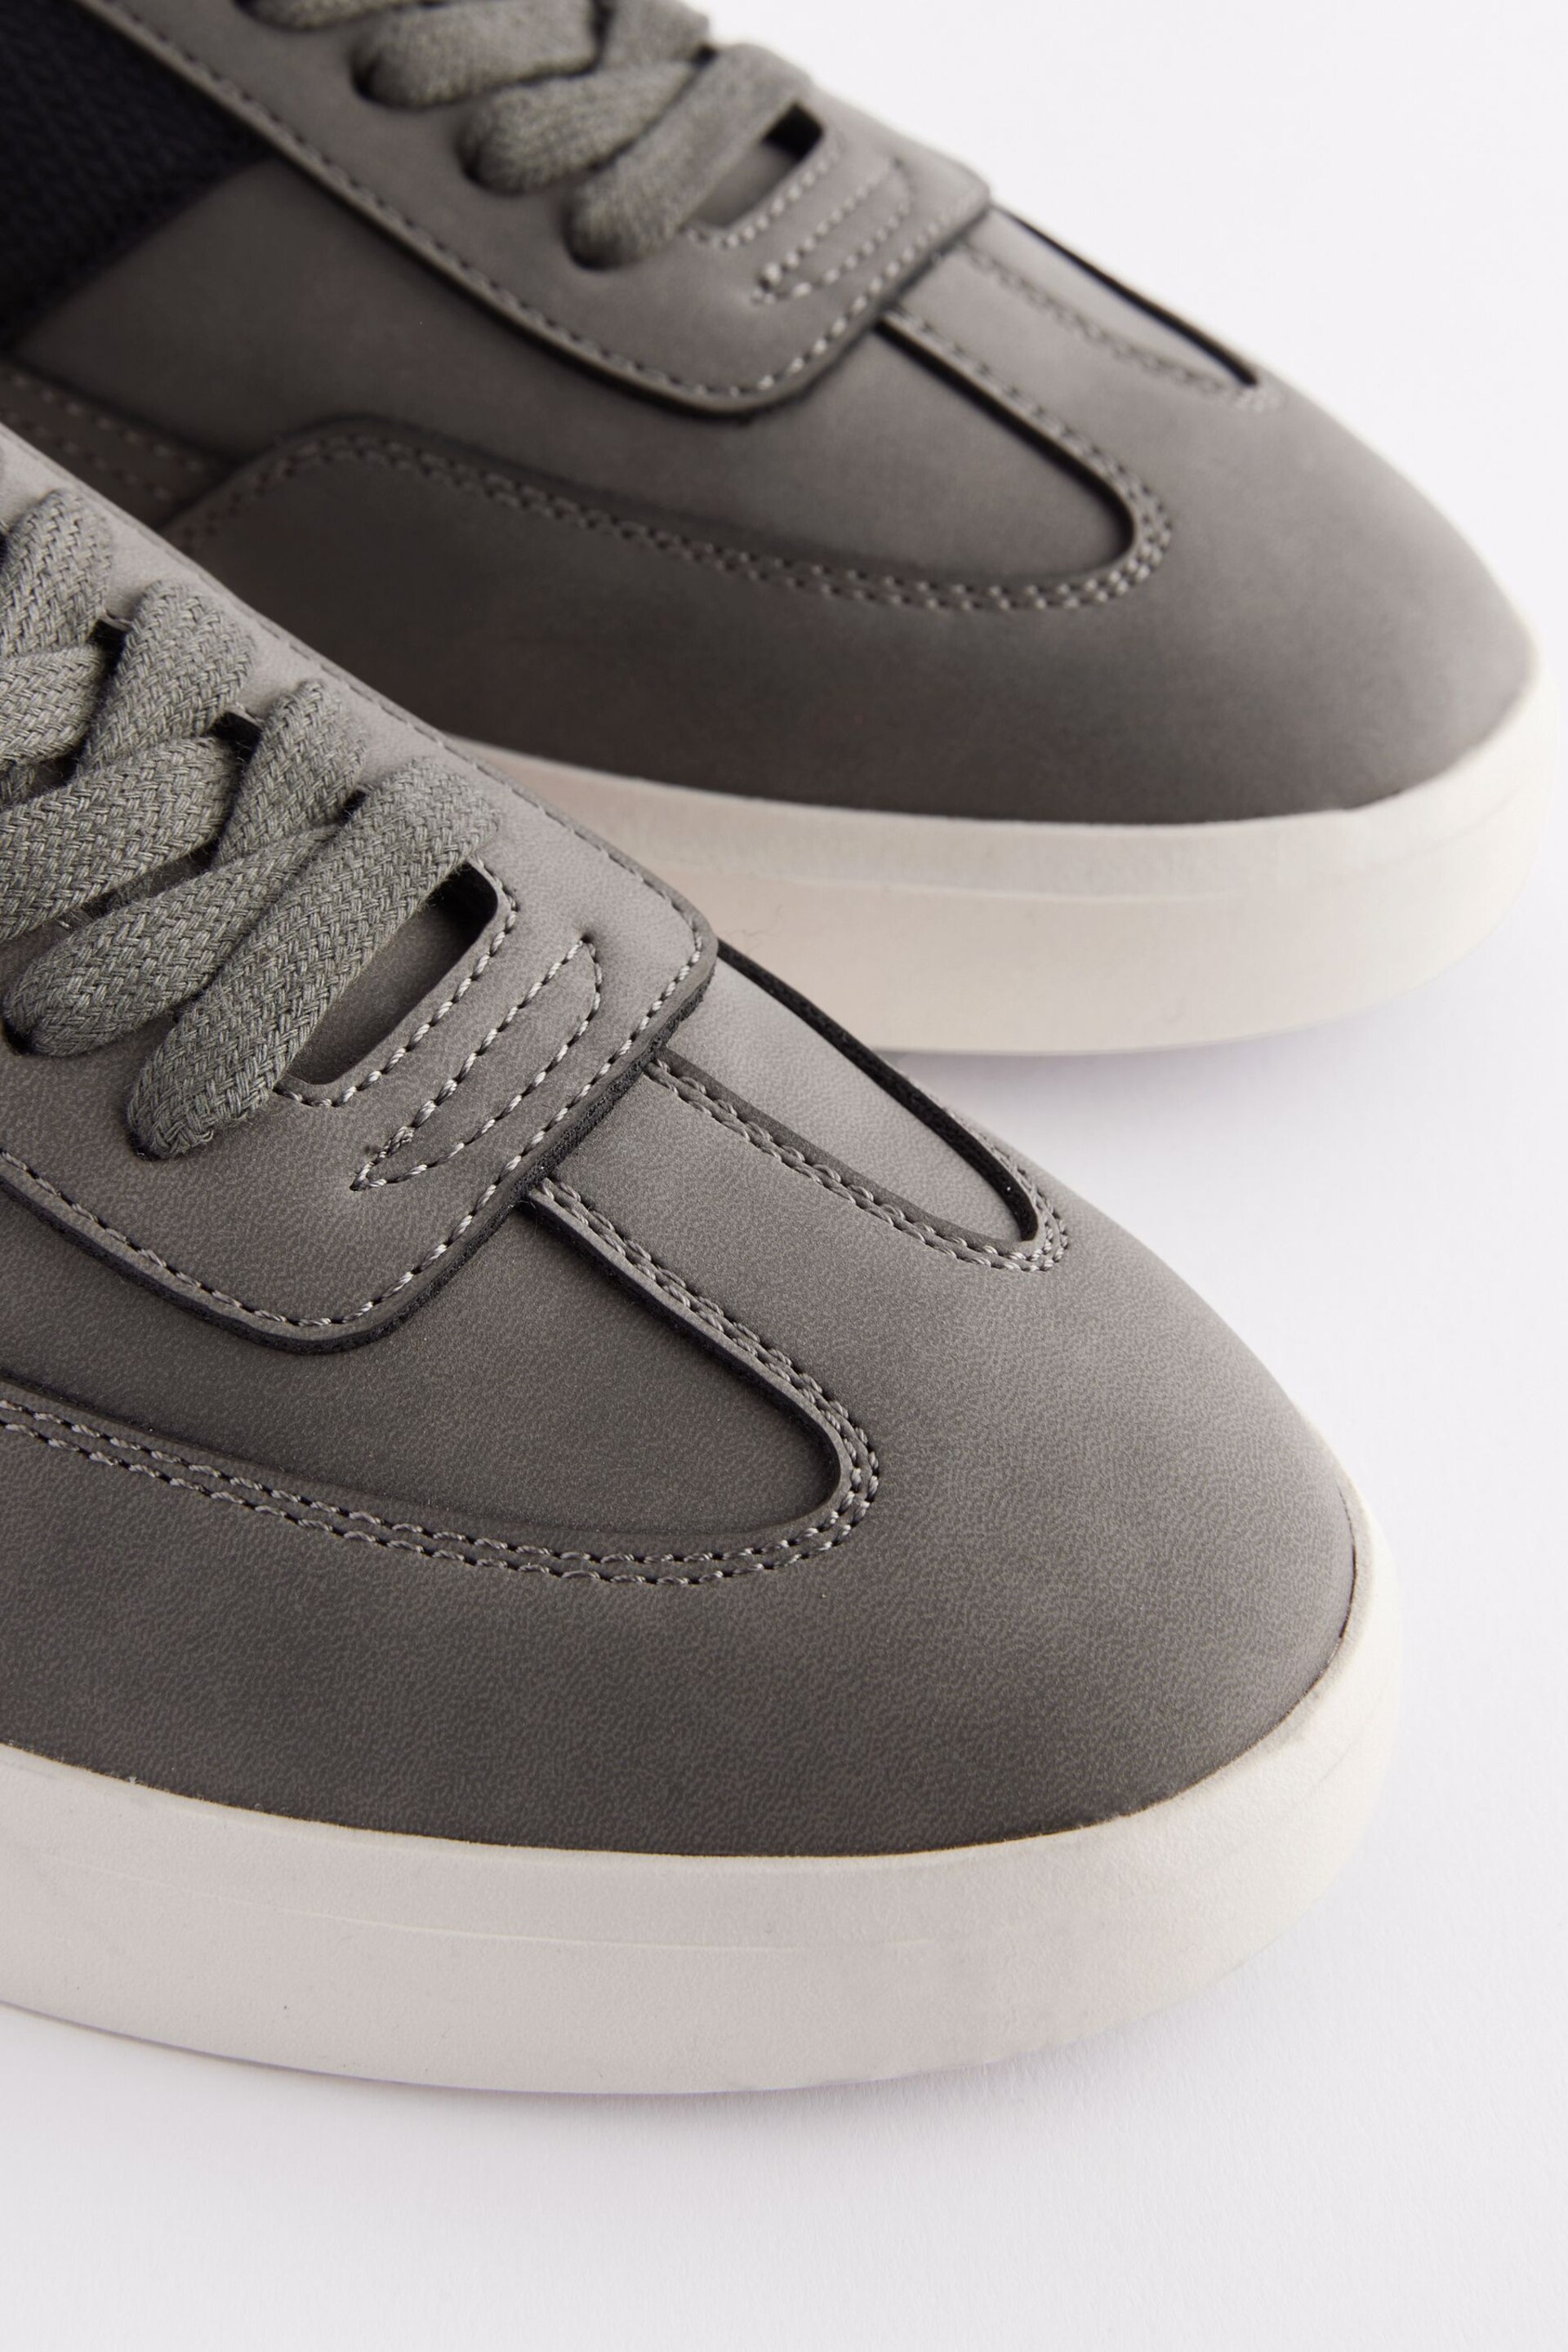 Grey Smart Trainers - Image 4 of 7